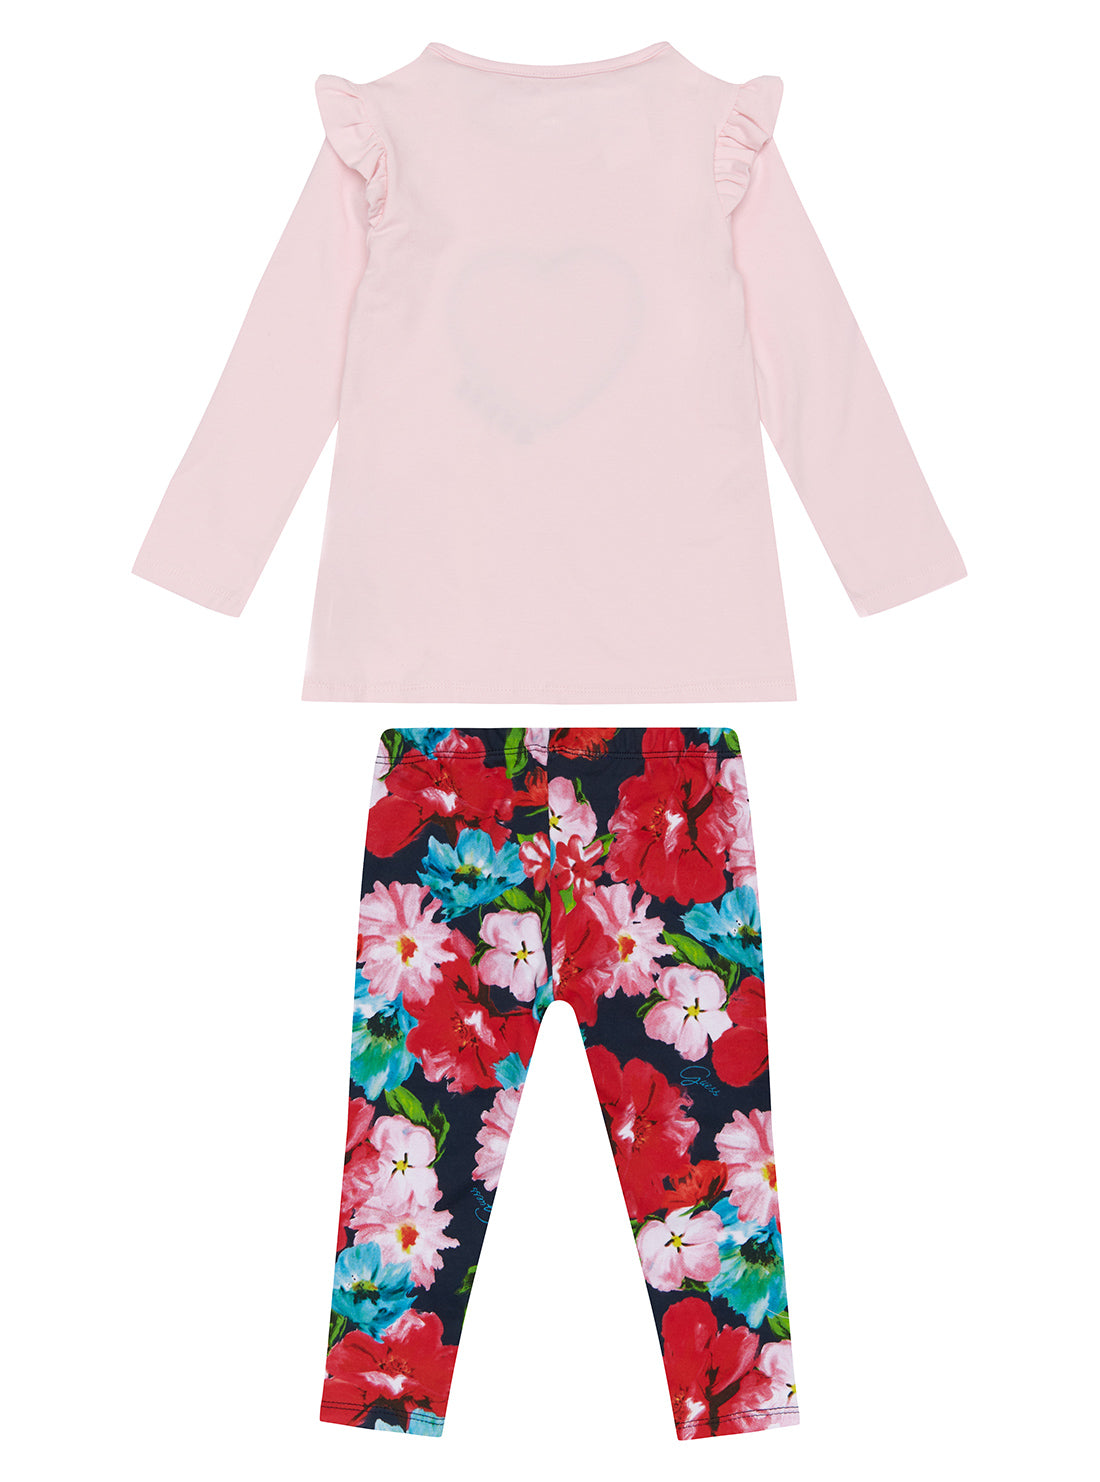 GUESS Pink Floral Long Sleeves and Leggings Set (3-18M) back view